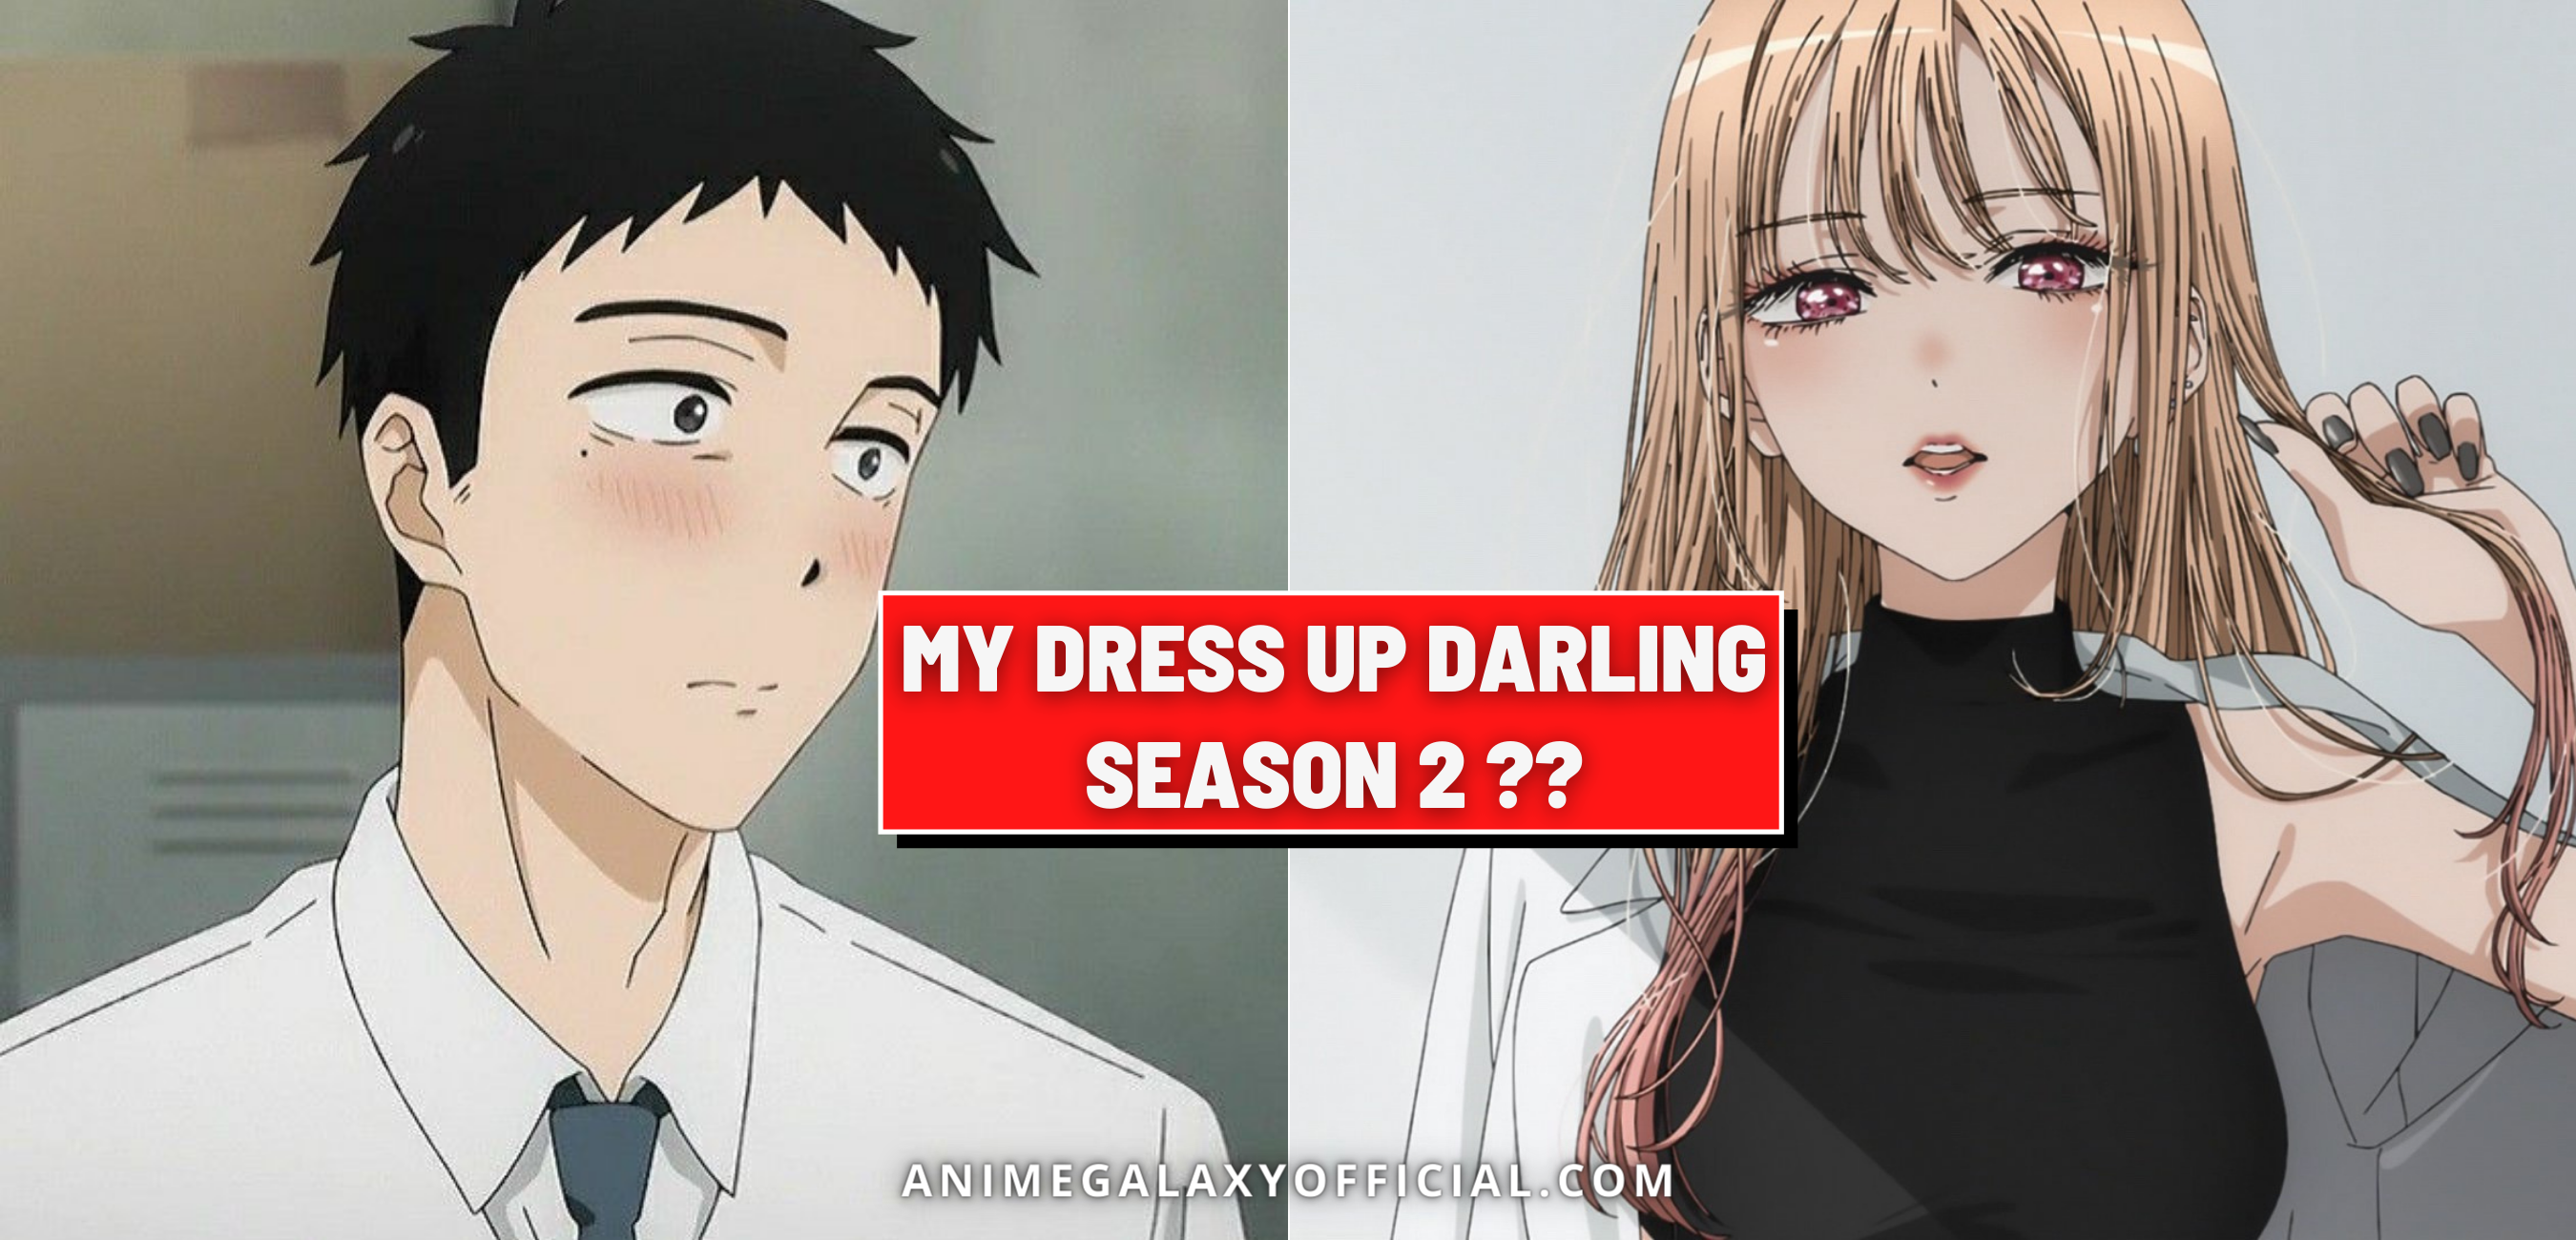 My Dress Up Darling Season 2 Possibility! Everything You Need To Know